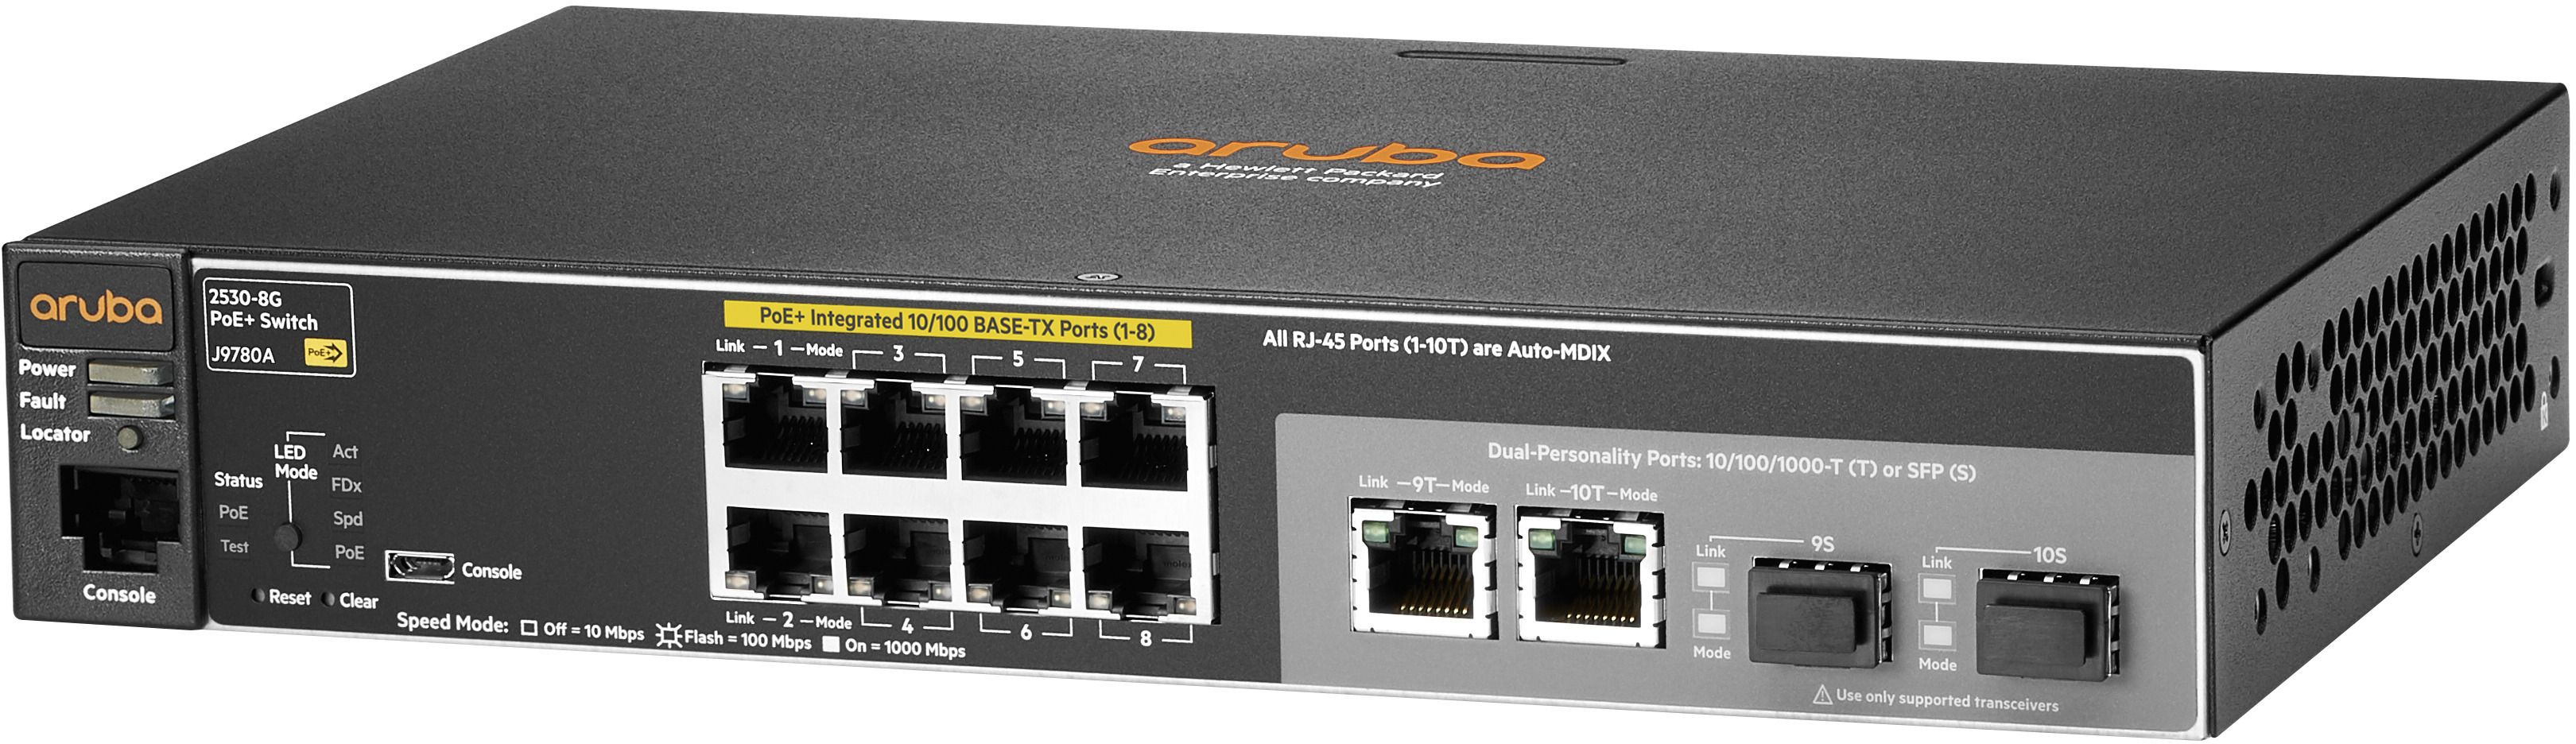 HPE 2530-8-PoE  Switch